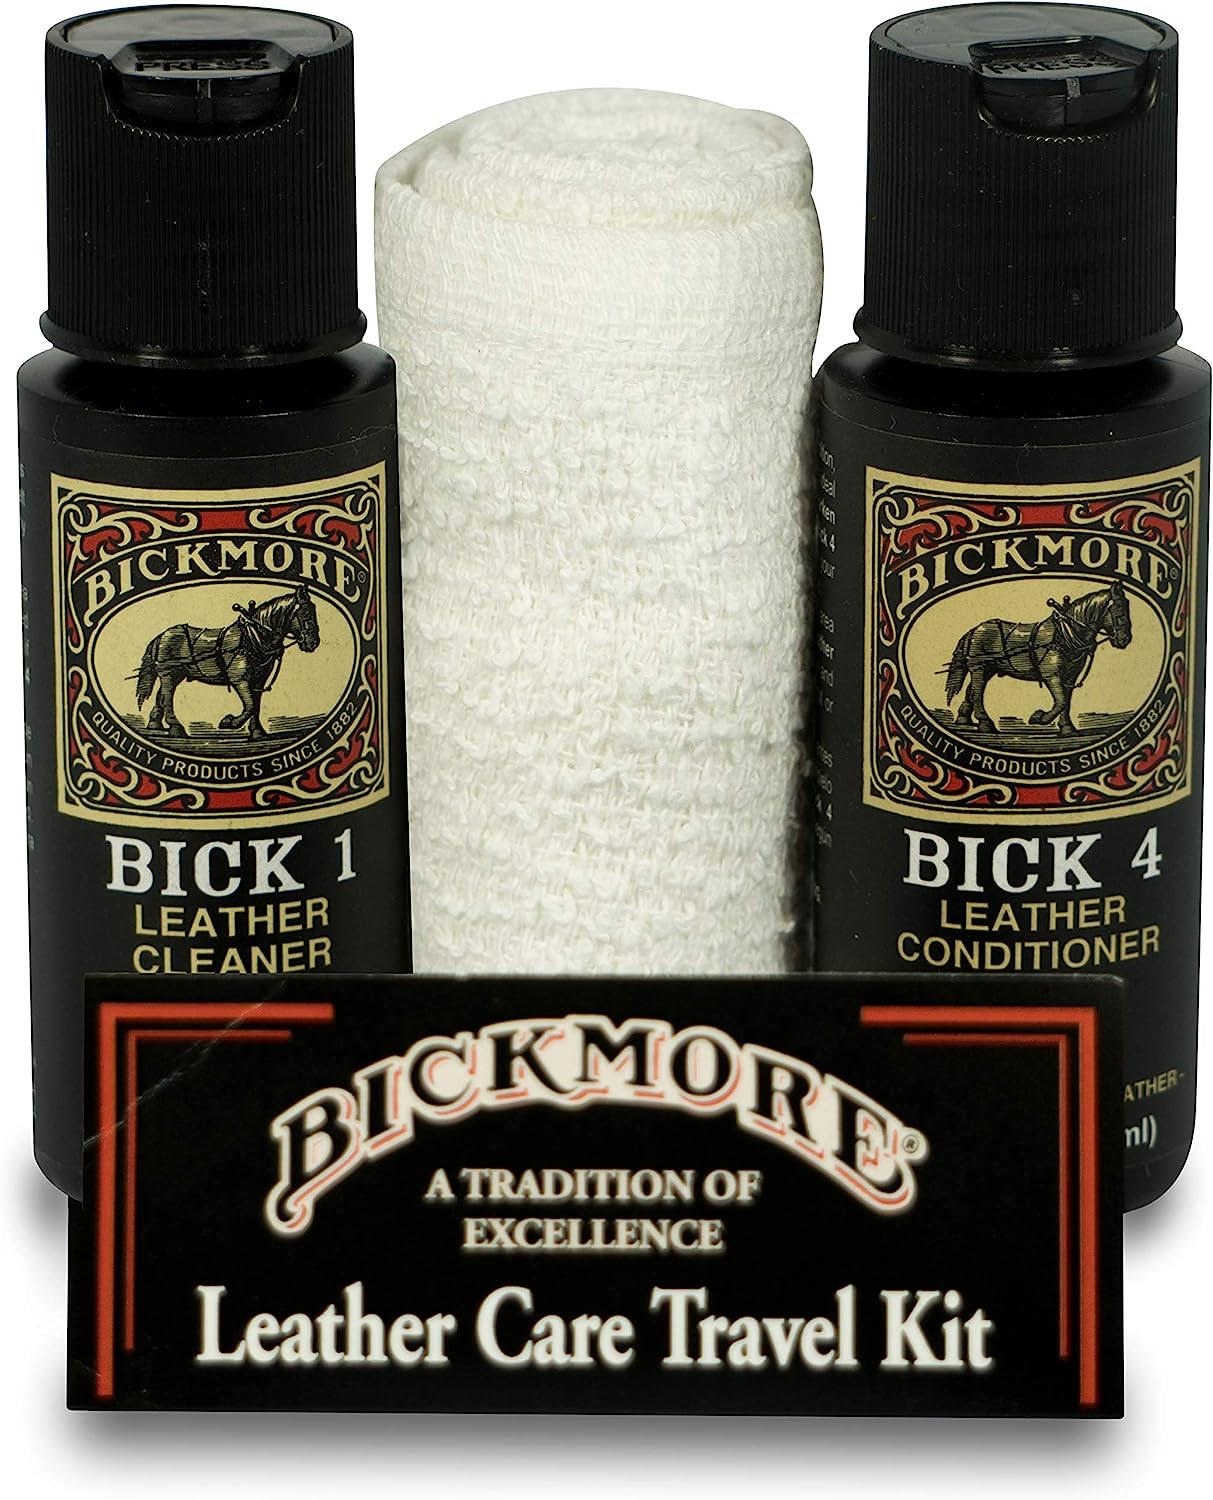 Bickmore Leather Shoe & Boot Travel Care Kit- Repairs, [...]